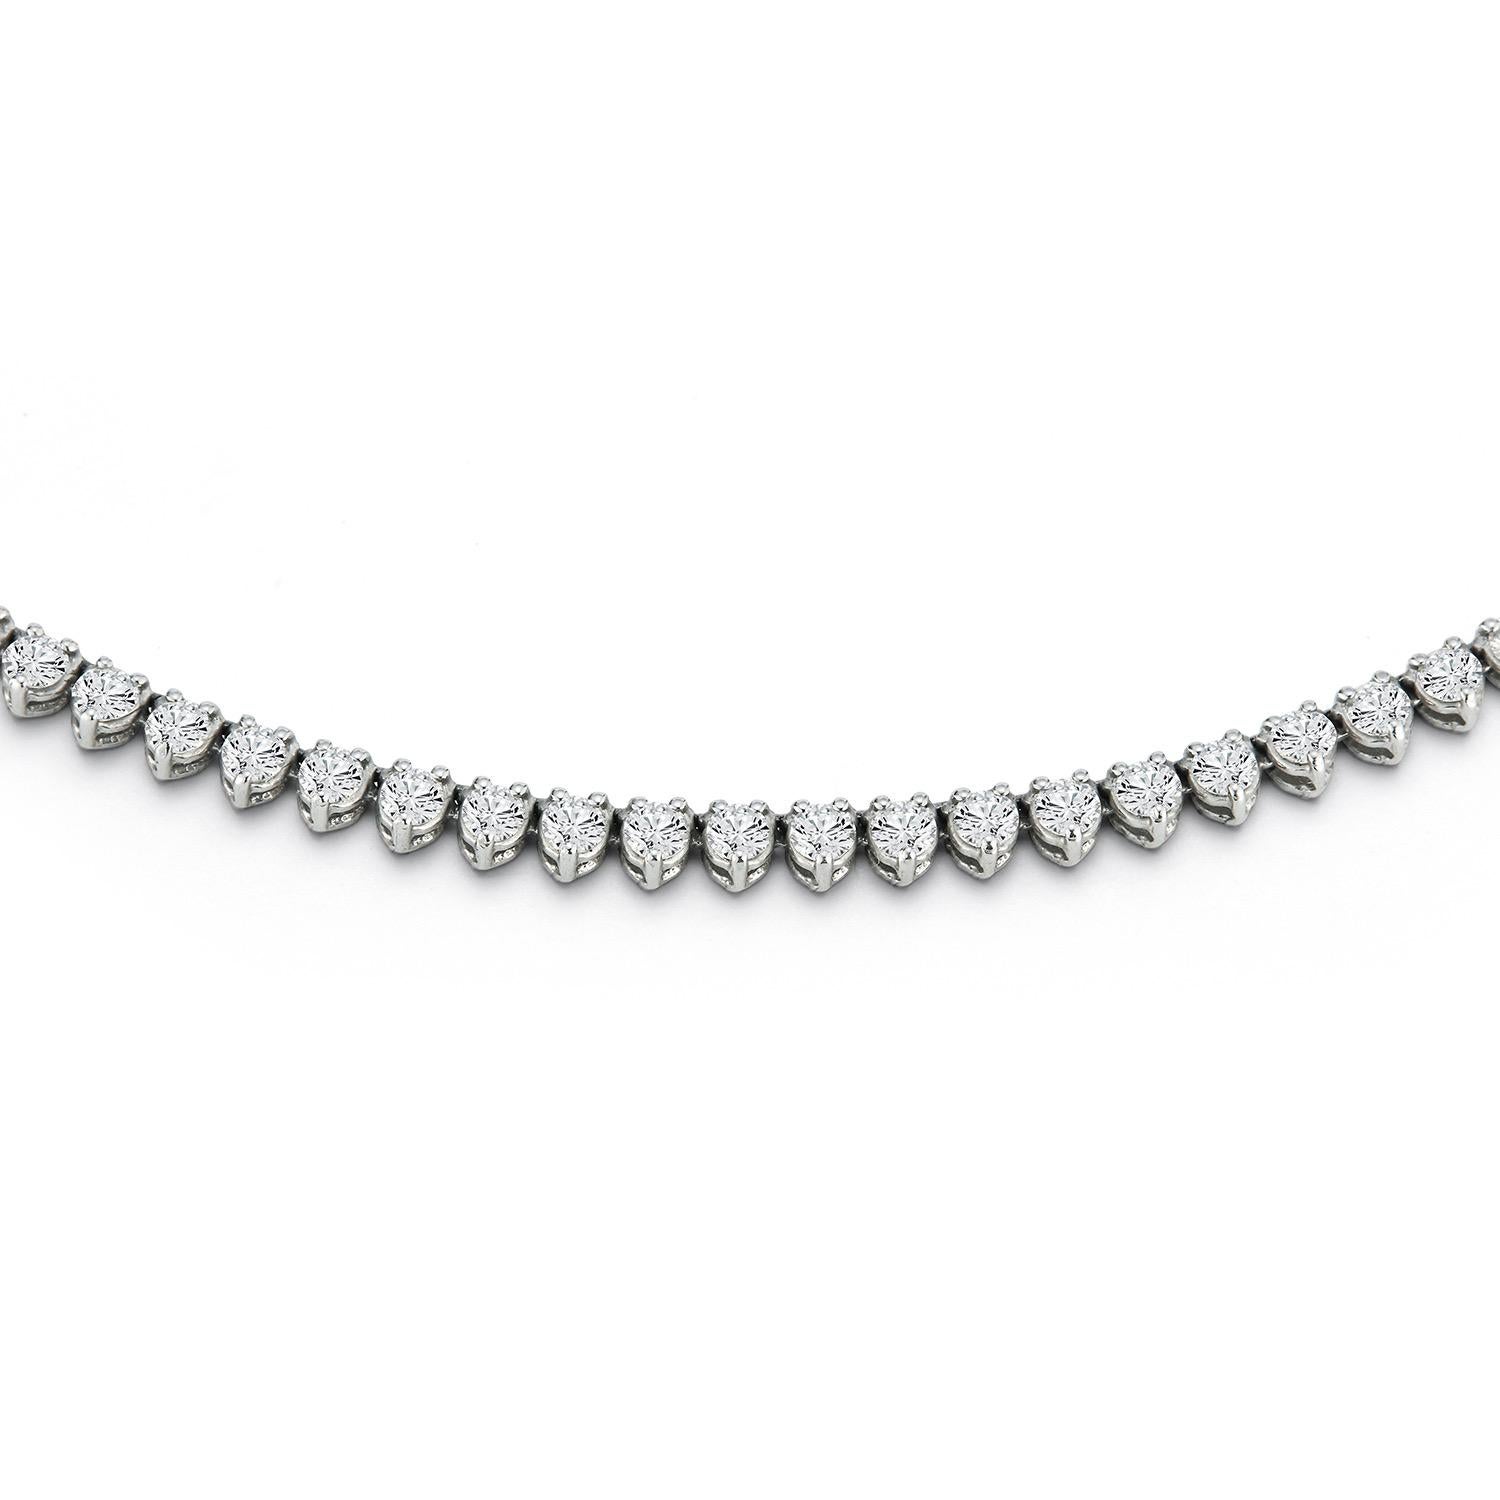 We are crazy about our 3-prong diamond necklaces. Classic and chic, these showcase an unexpected take with an edgy three-prong setting. While these are substantial and stunning to be worn to a serious black tie affair, they are sleek enough to be